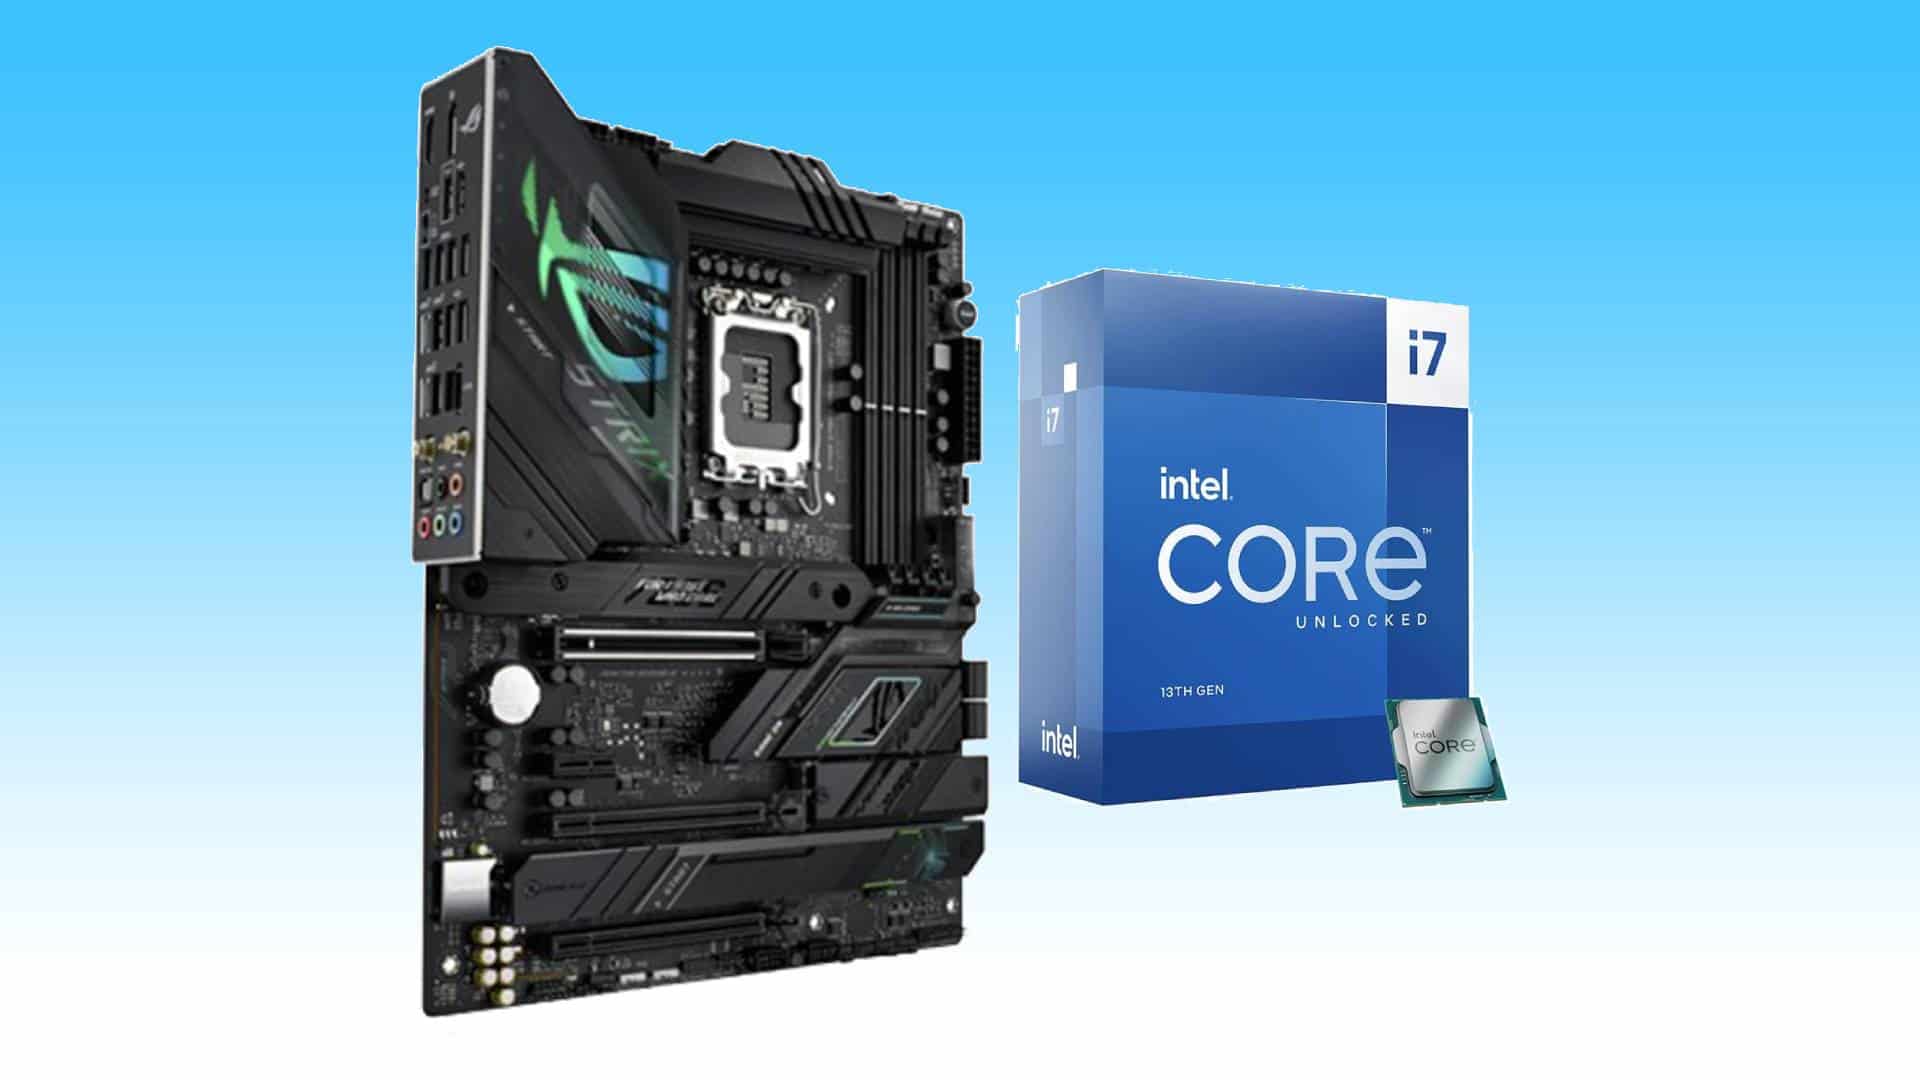 A gaming PC motherboard next to an intel core i7 processor box against a blue background.